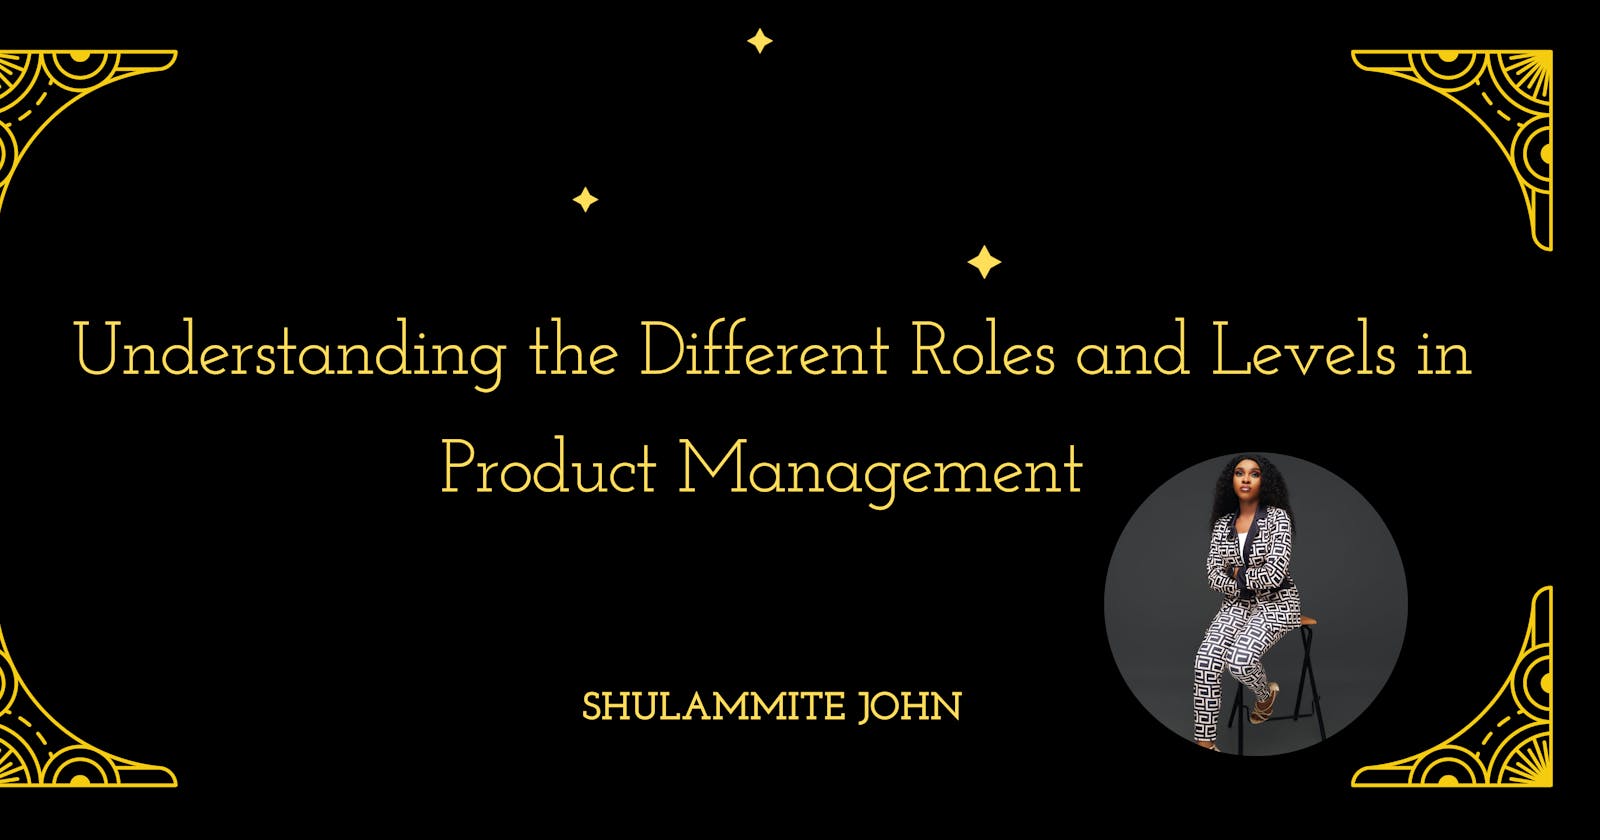 Understanding the Different Roles and Levels in Product Management